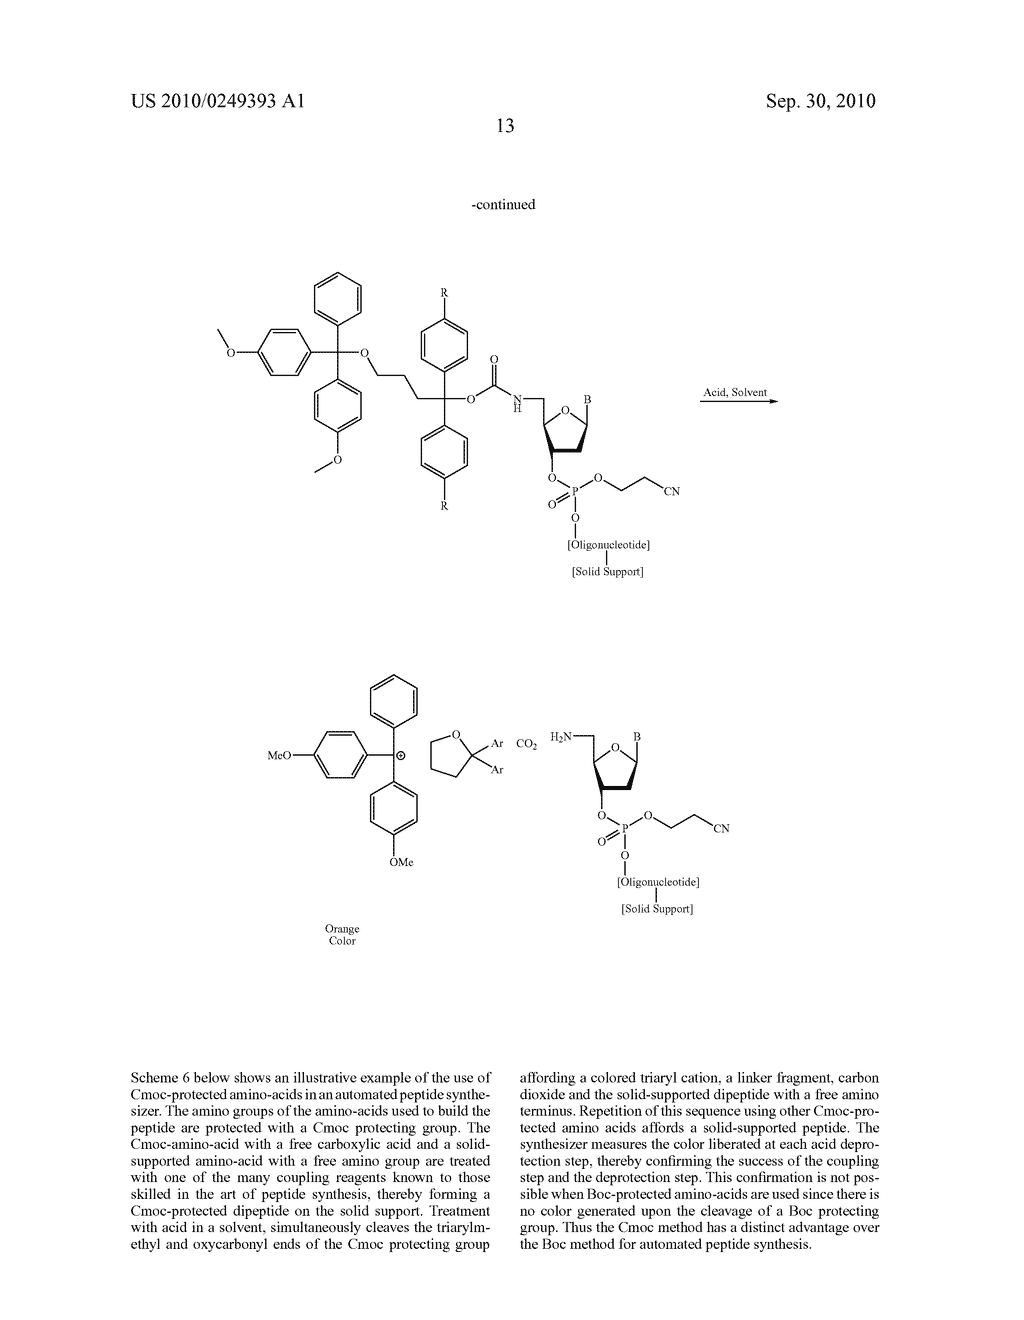 COLORIMETRIC-OXYCARBONYL PROTECTING GROUPS FOR USE IN ORGANIC SYNTHESES - diagram, schematic, and image 14